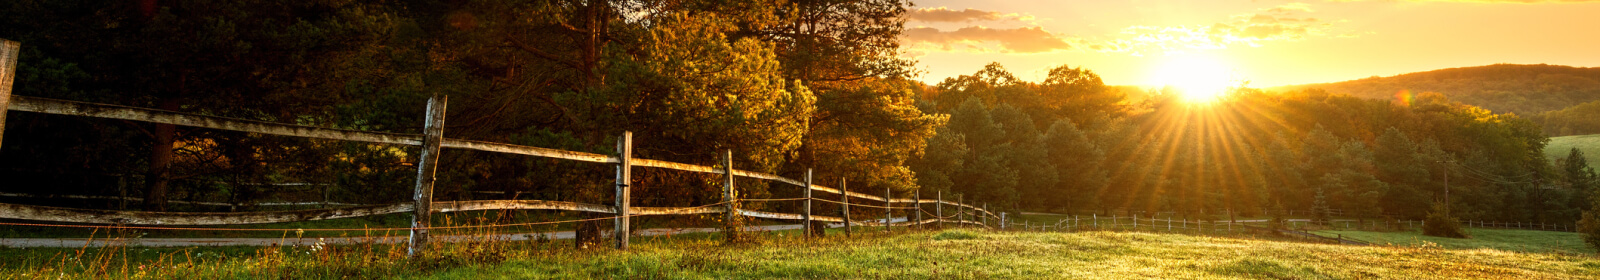 Scenic photo of a sunset and wooden fence